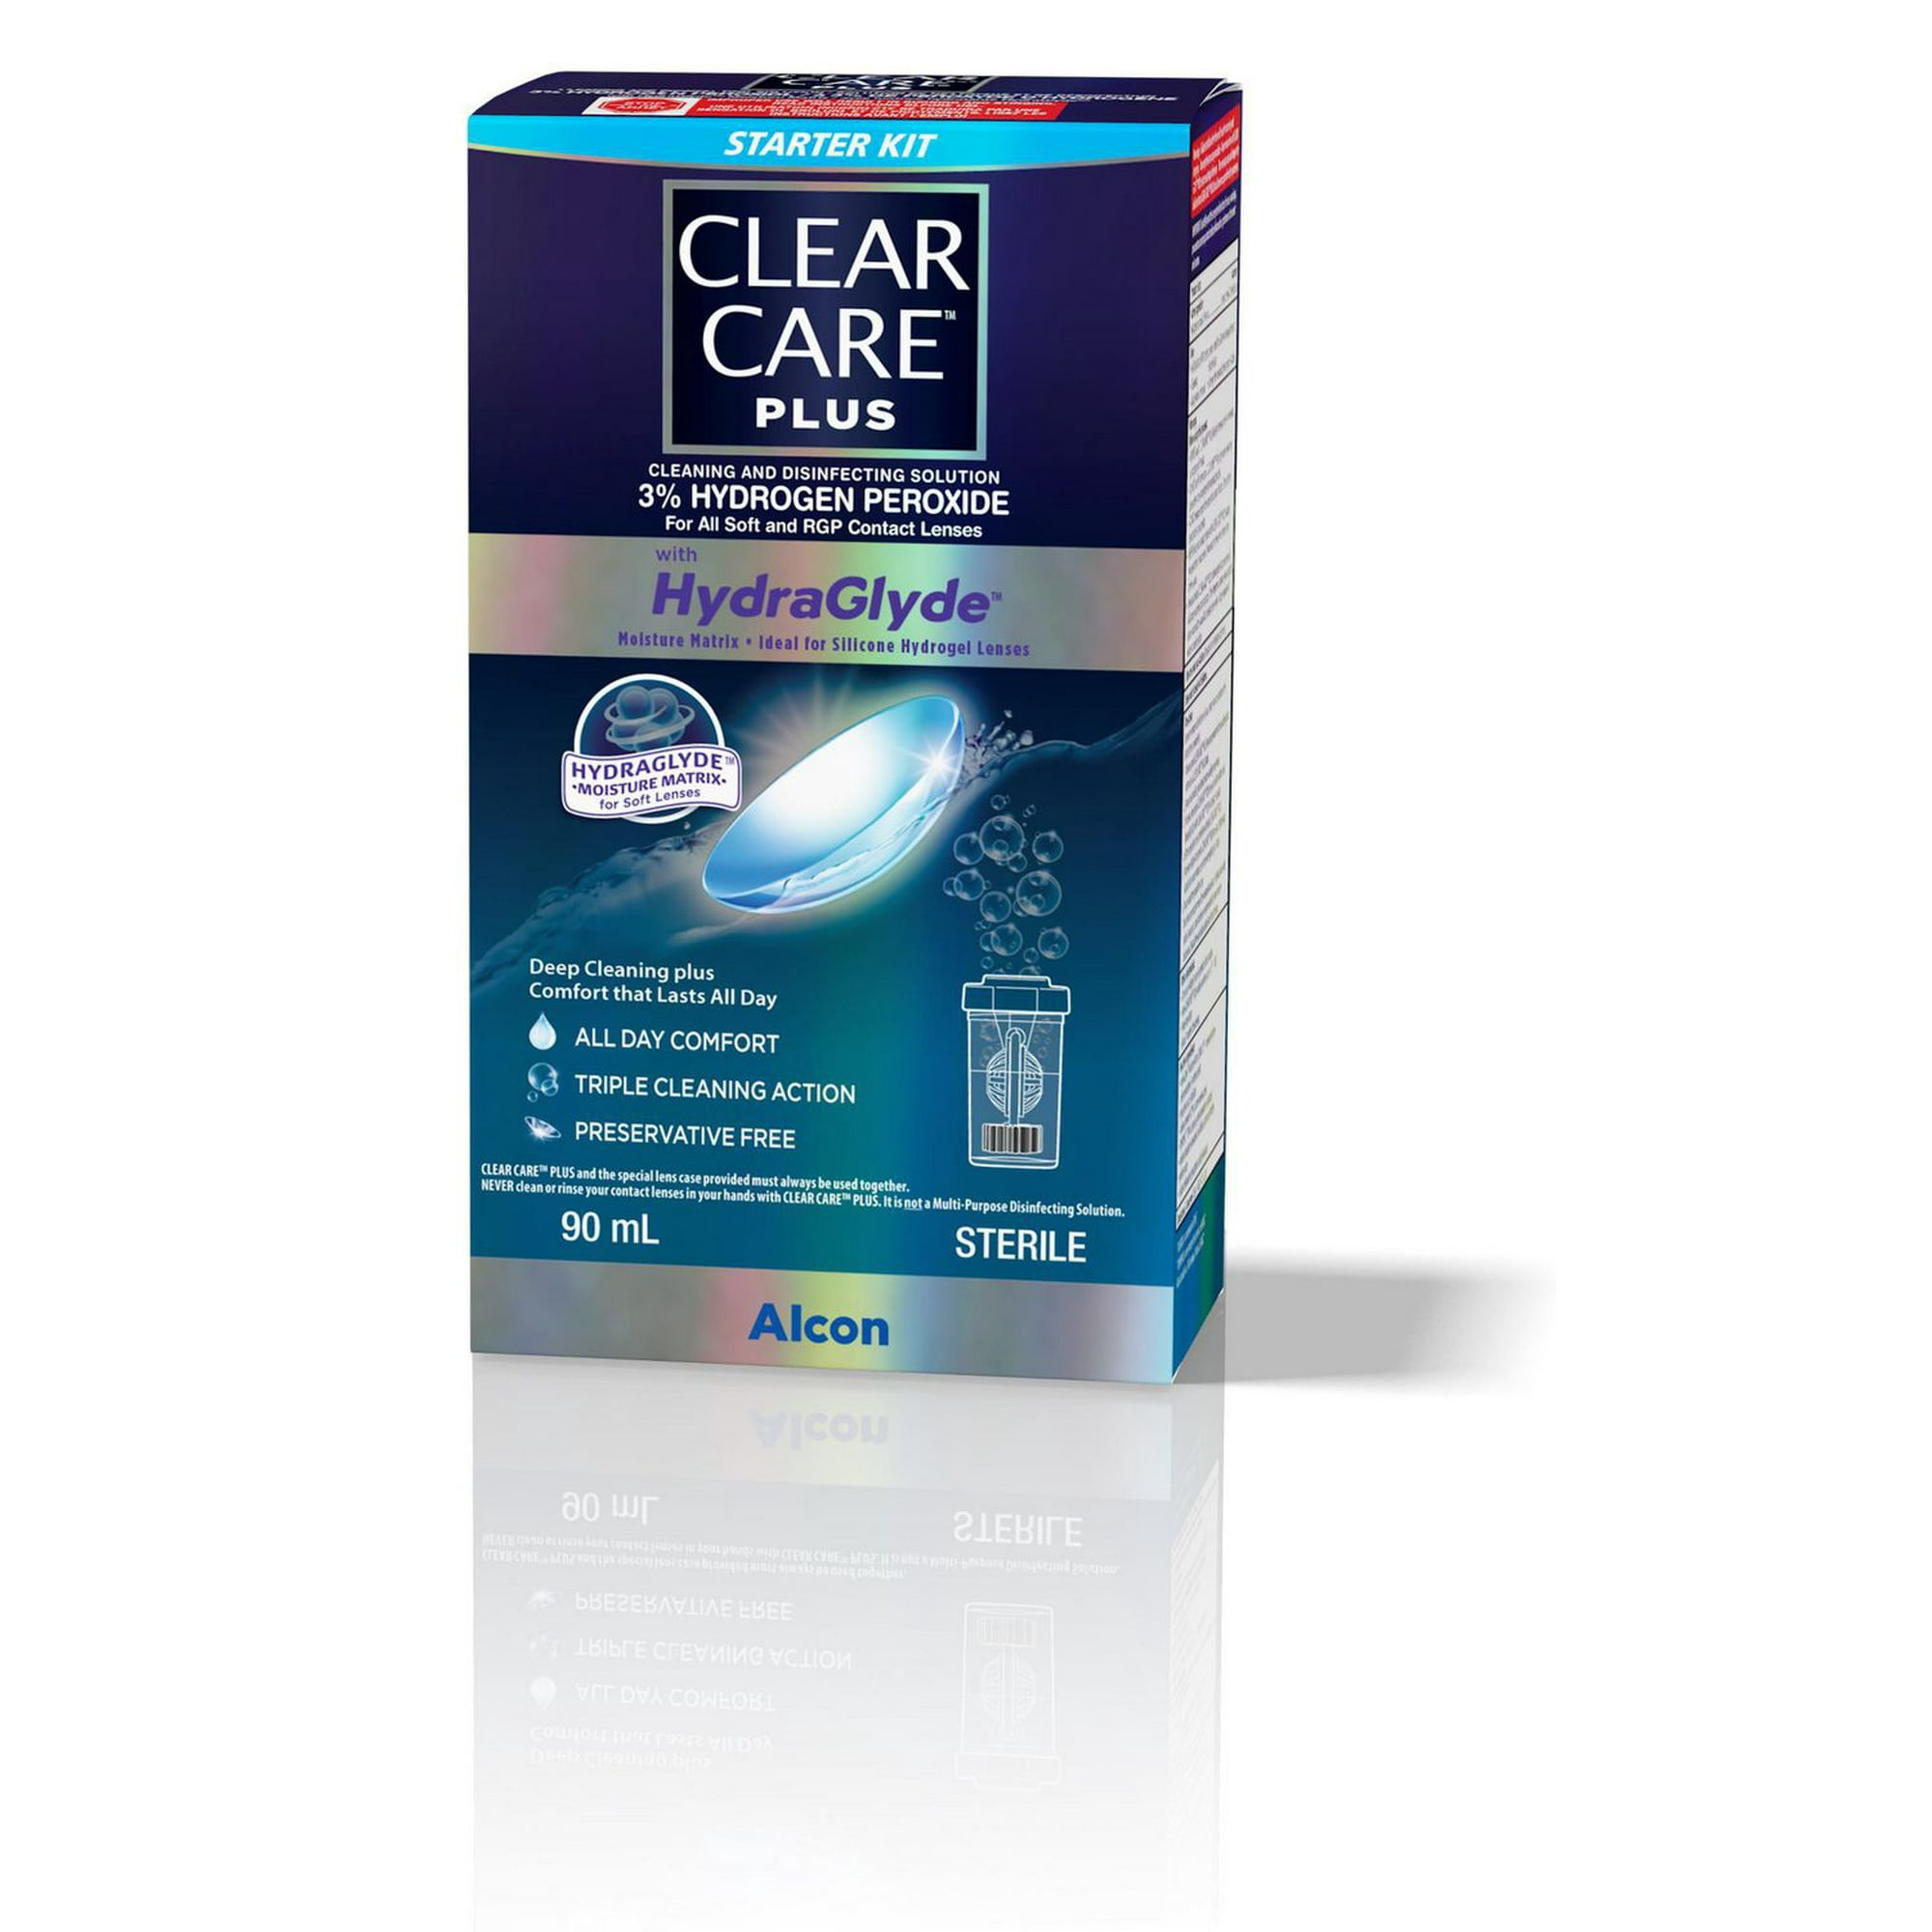  Clear Care Plus Cleaning Solution with Lens Case, Twin Pack,  Multi, 12 Oz, Pack of 2 : Health & Household